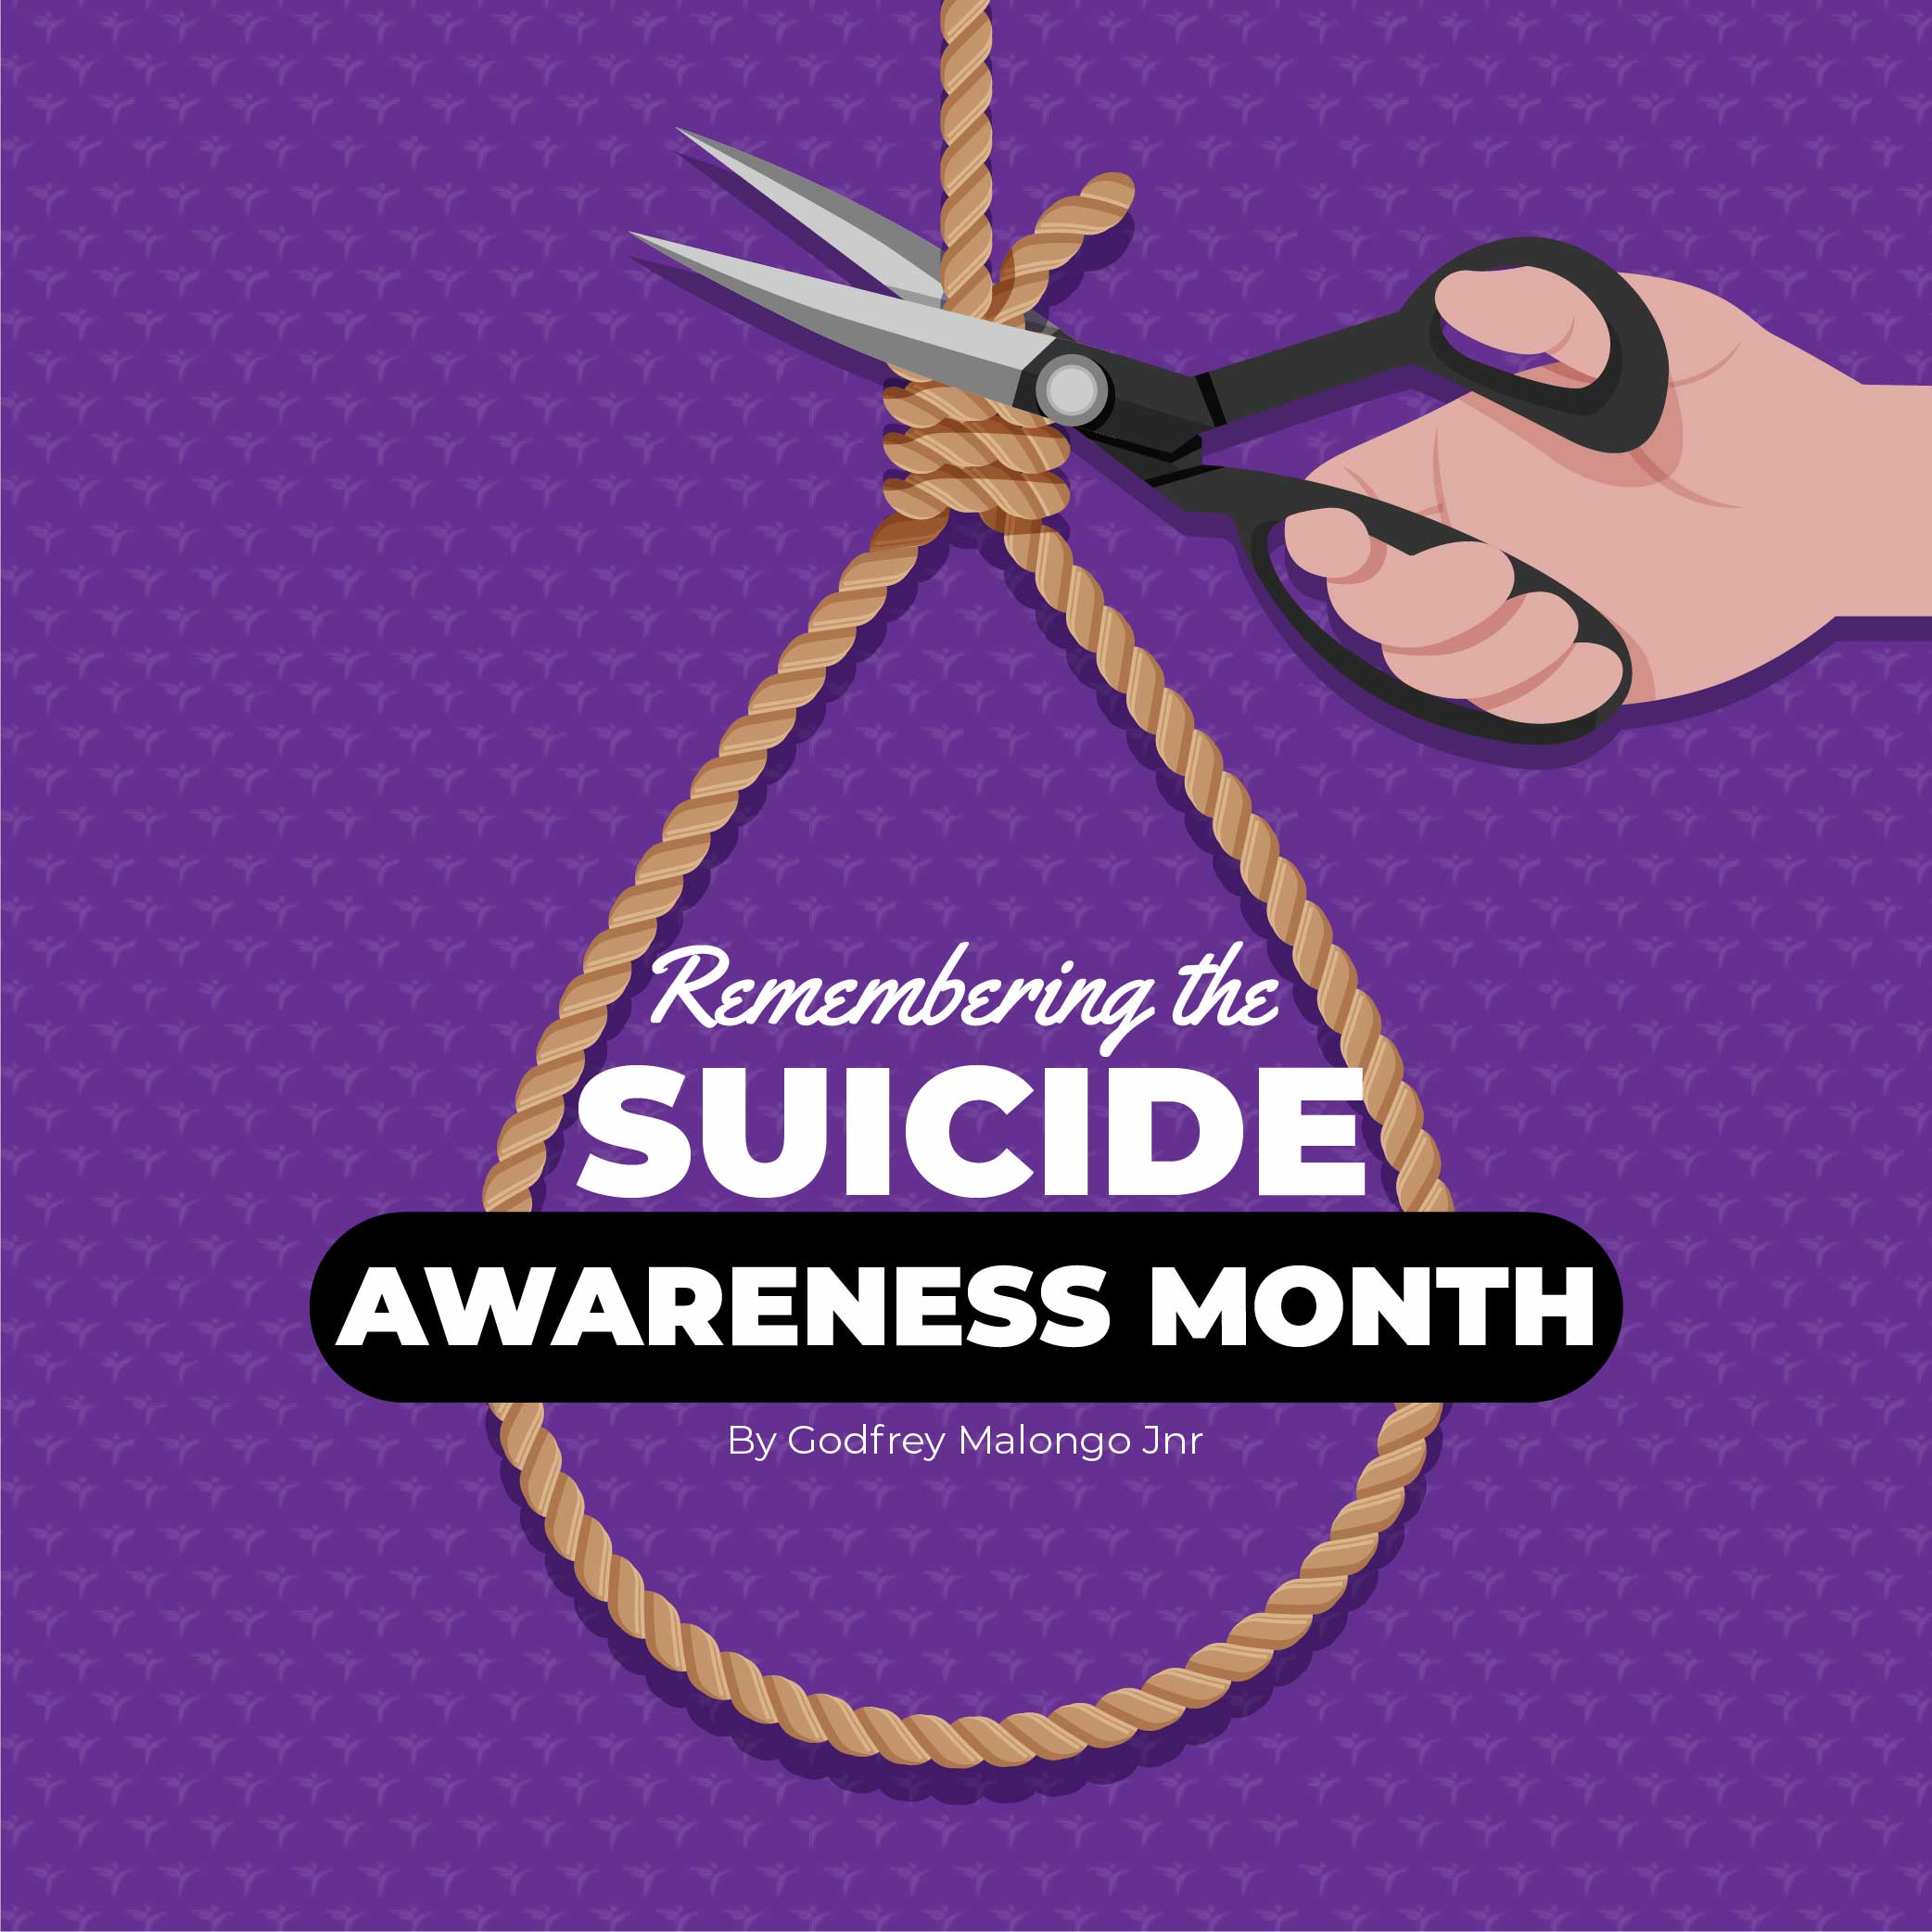 Remembering the Suicide Awareness Month